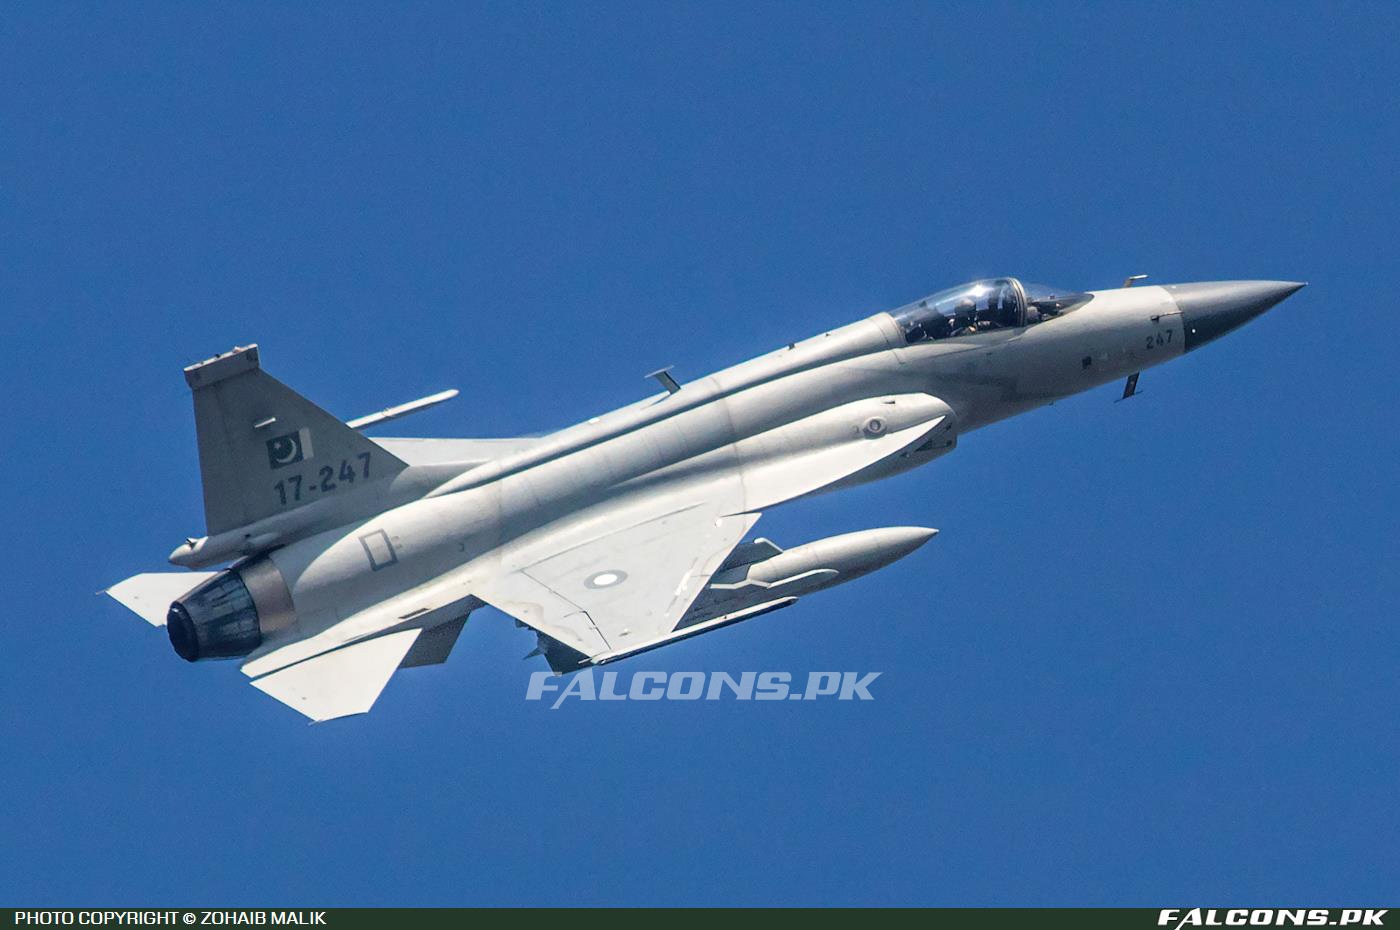 PAF JF 17 Thunder jet crashed near Pindi Gheb pilot ejected